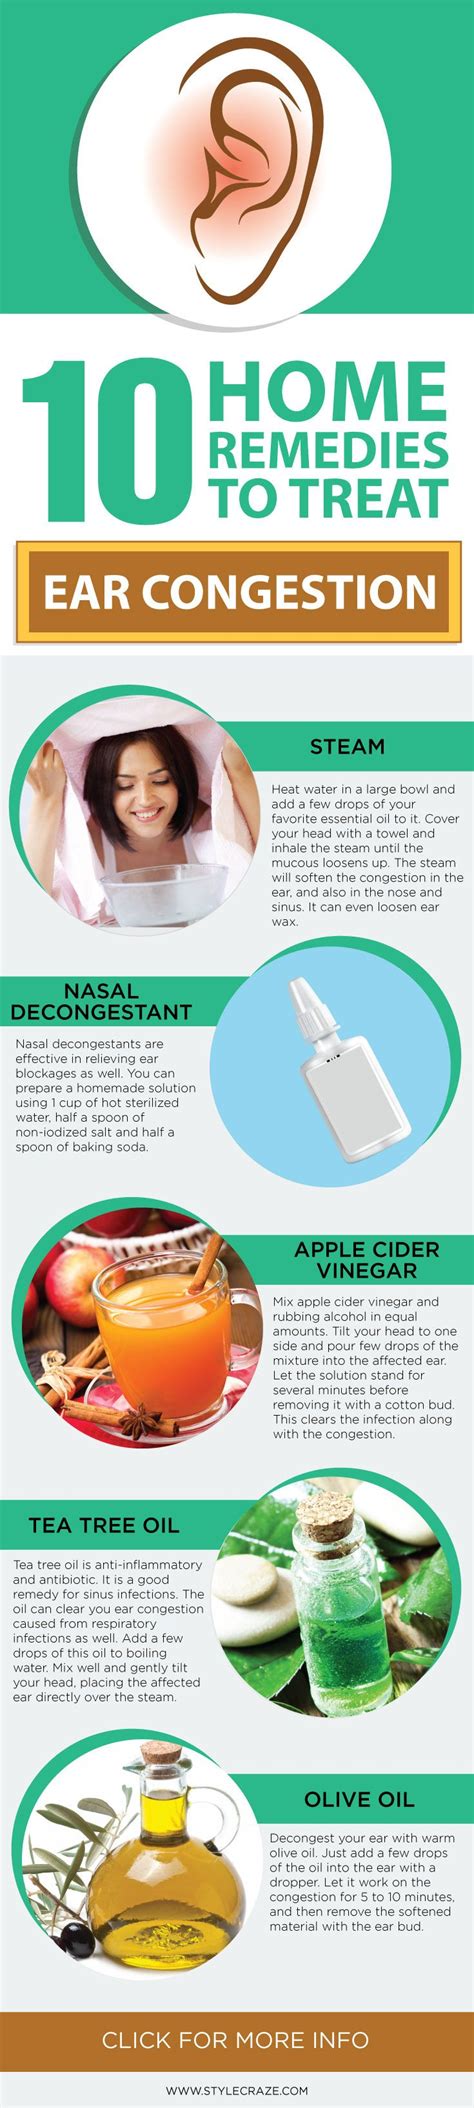 How To Unblock Clogged Ears Naturally 8 Effective Home Remedies